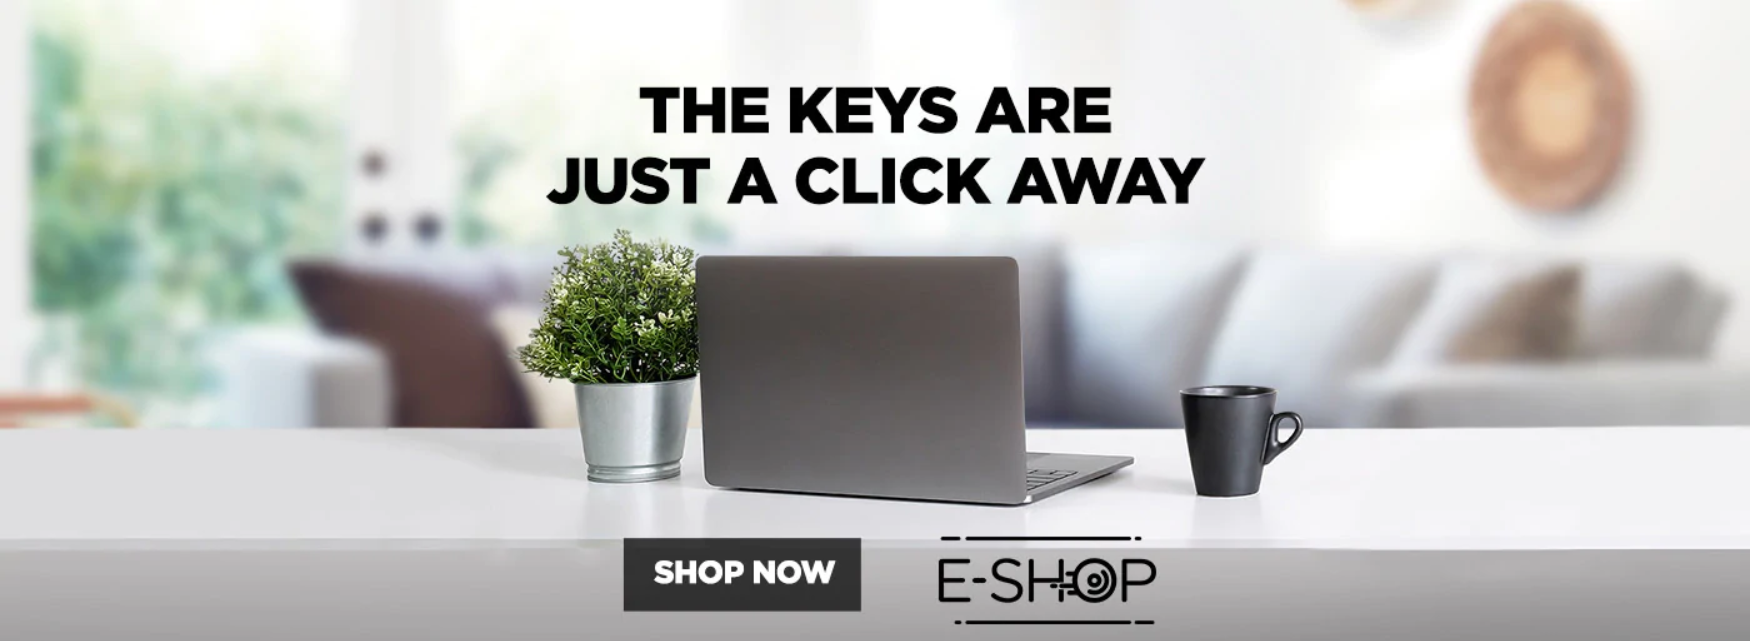 The keys are just a click away.